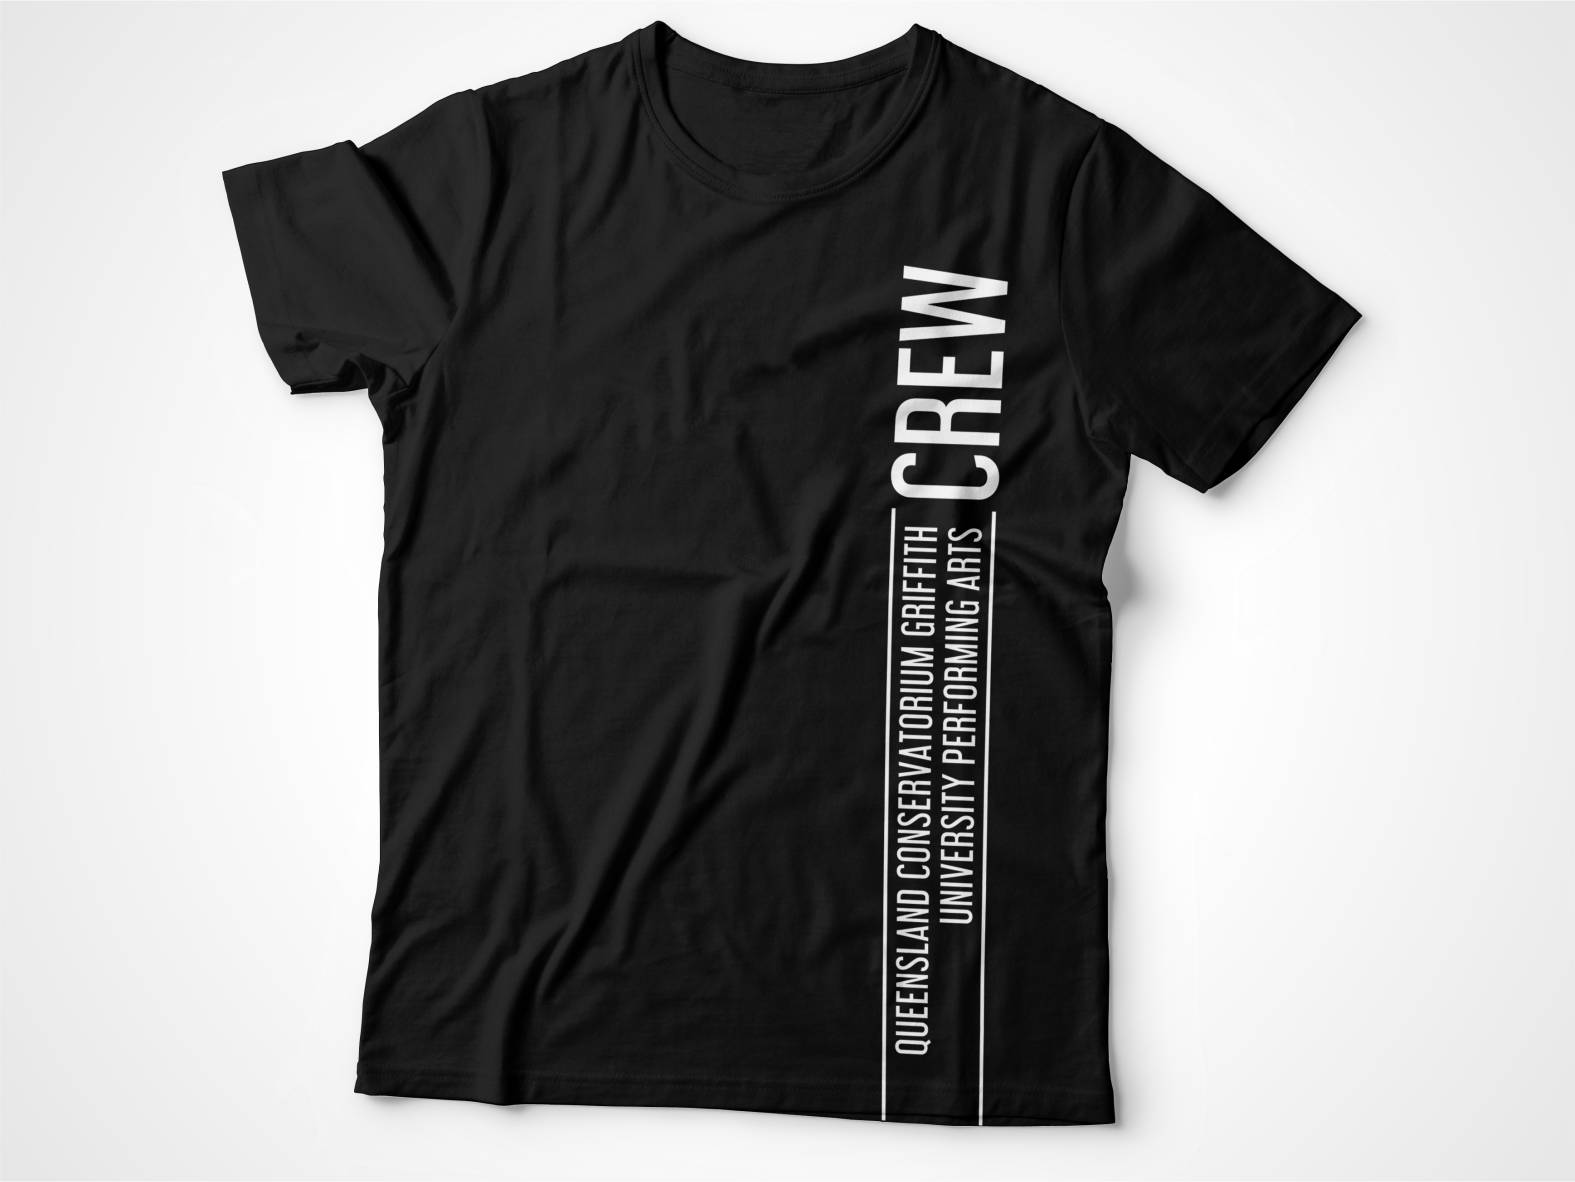 Winning Design #46 By Arni_Admim, T Shirt Design For Backstage Crew Shirt Contest - Backstage Crew, Transparent background PNG HD thumbnail